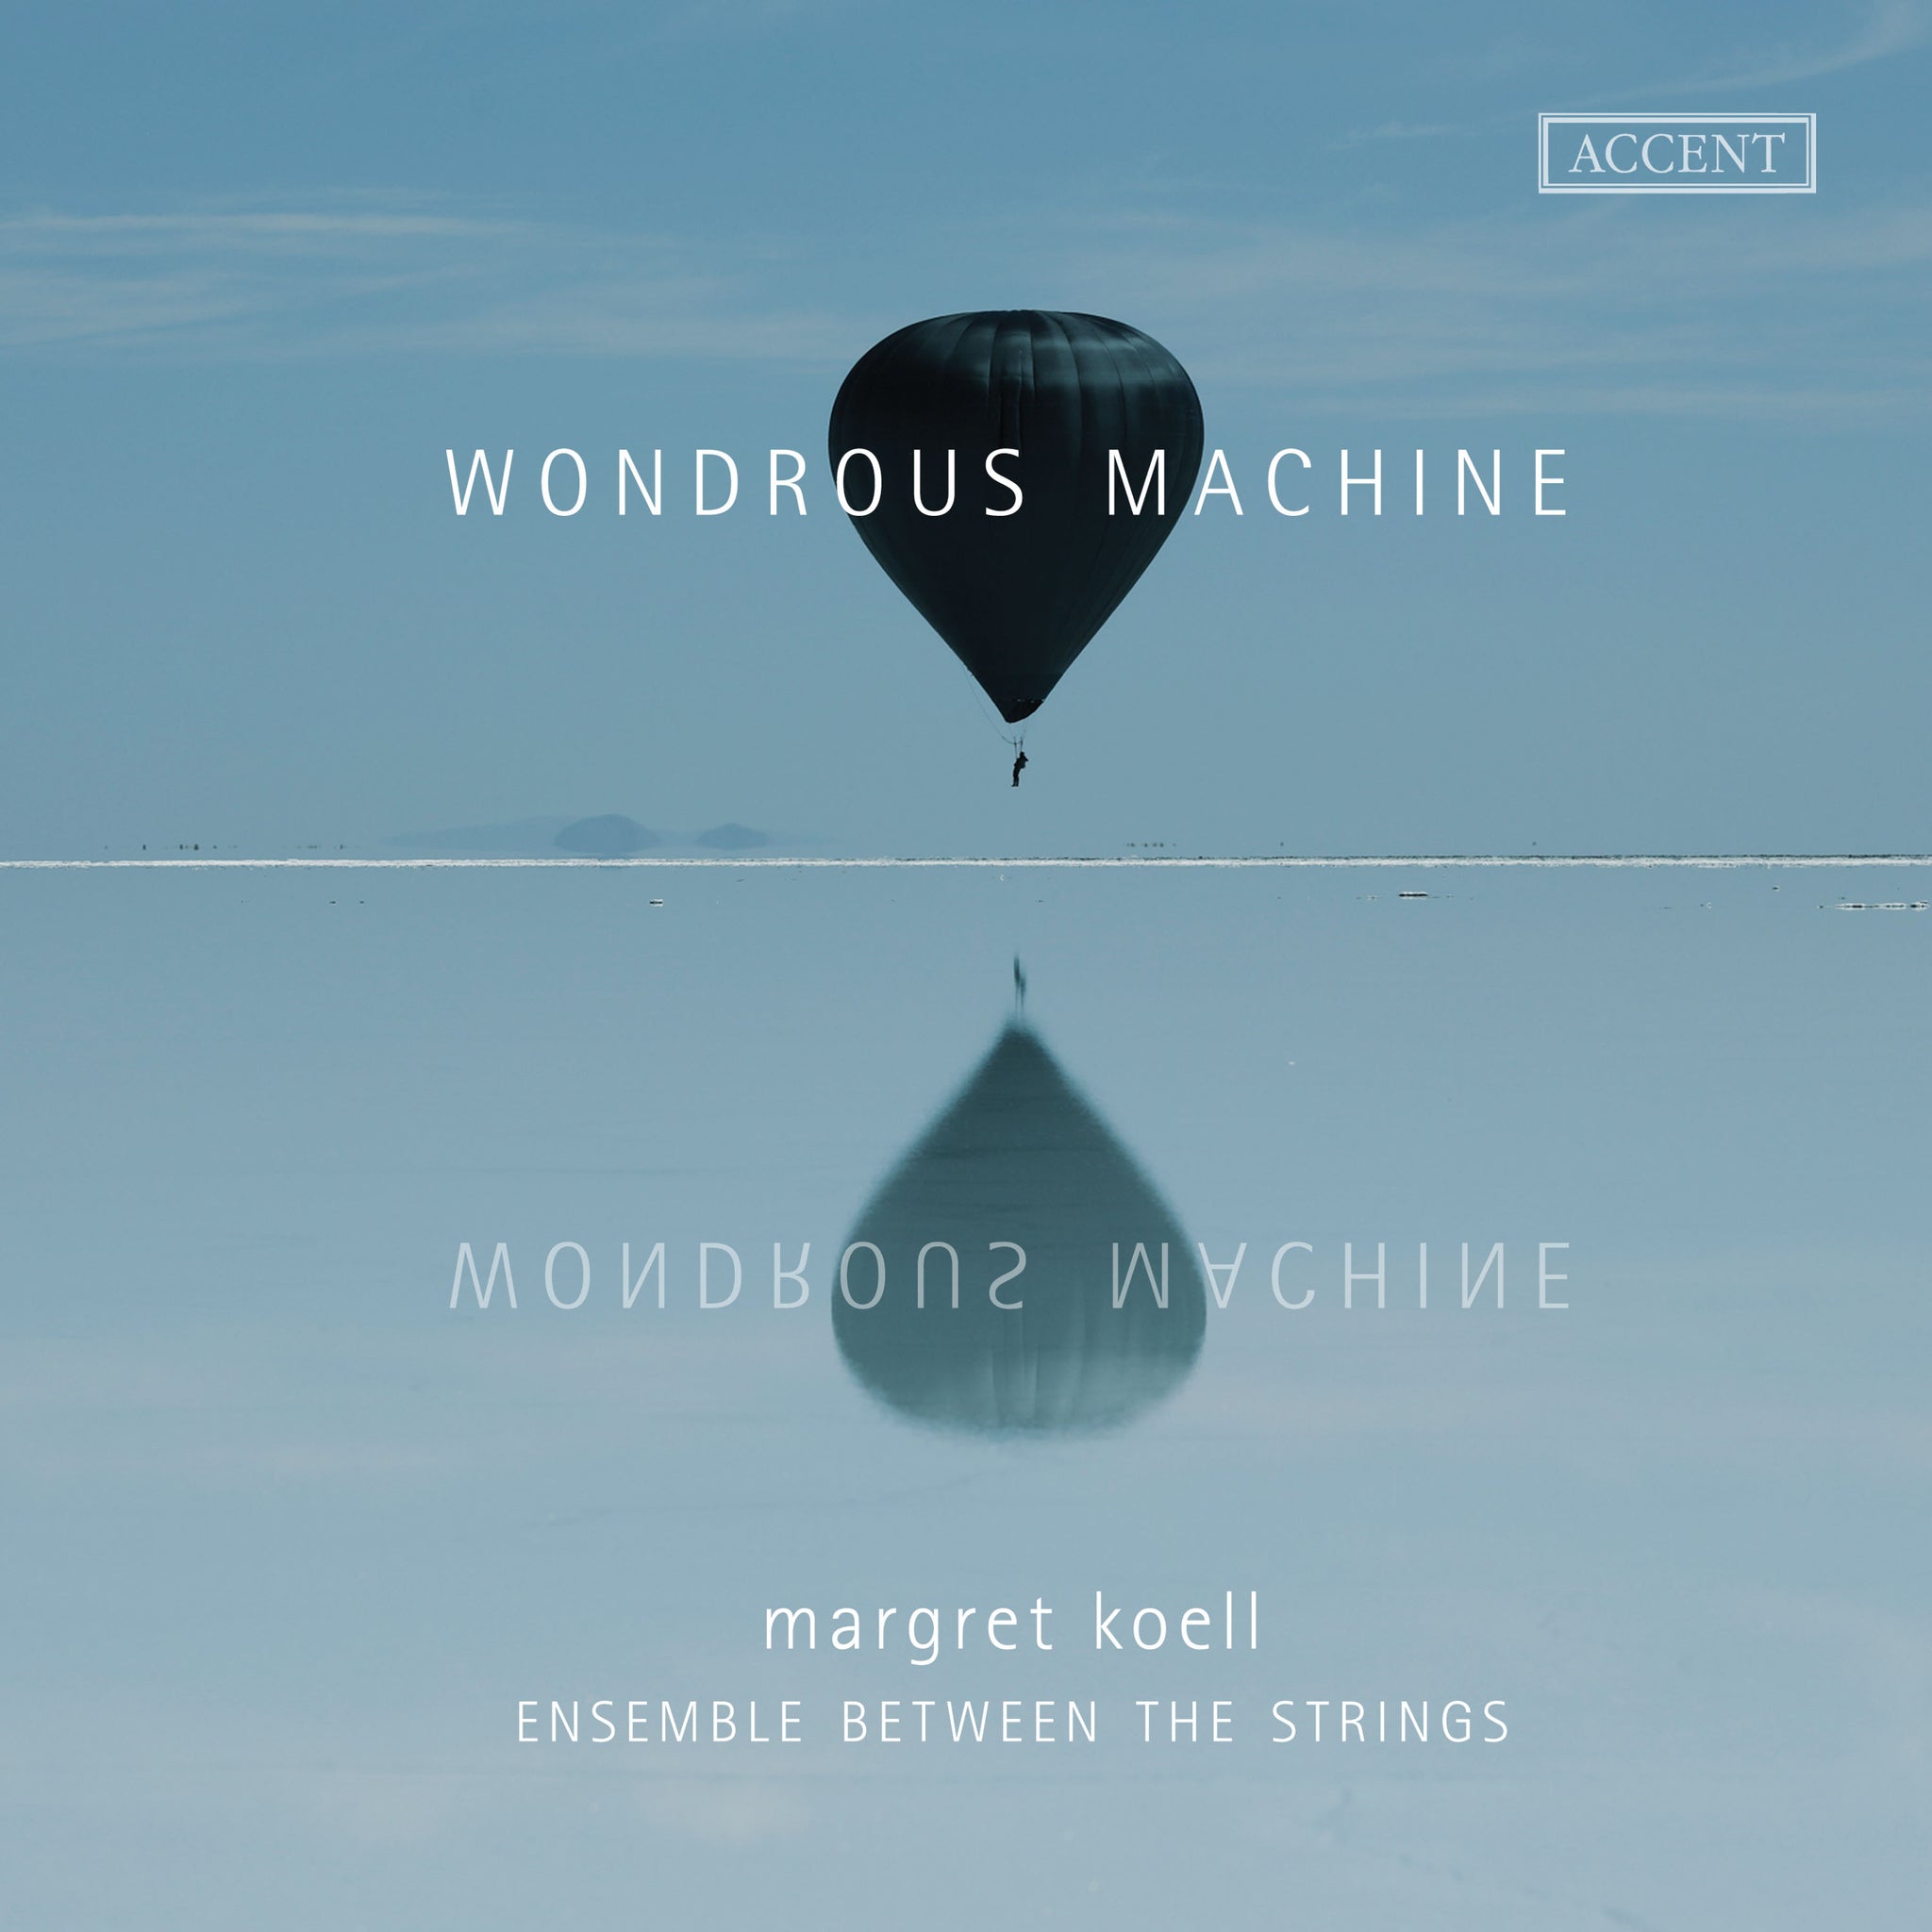 Dienz, Handel & Oswald: Woundrous Machine / Koell, Ensemble Between the Strings